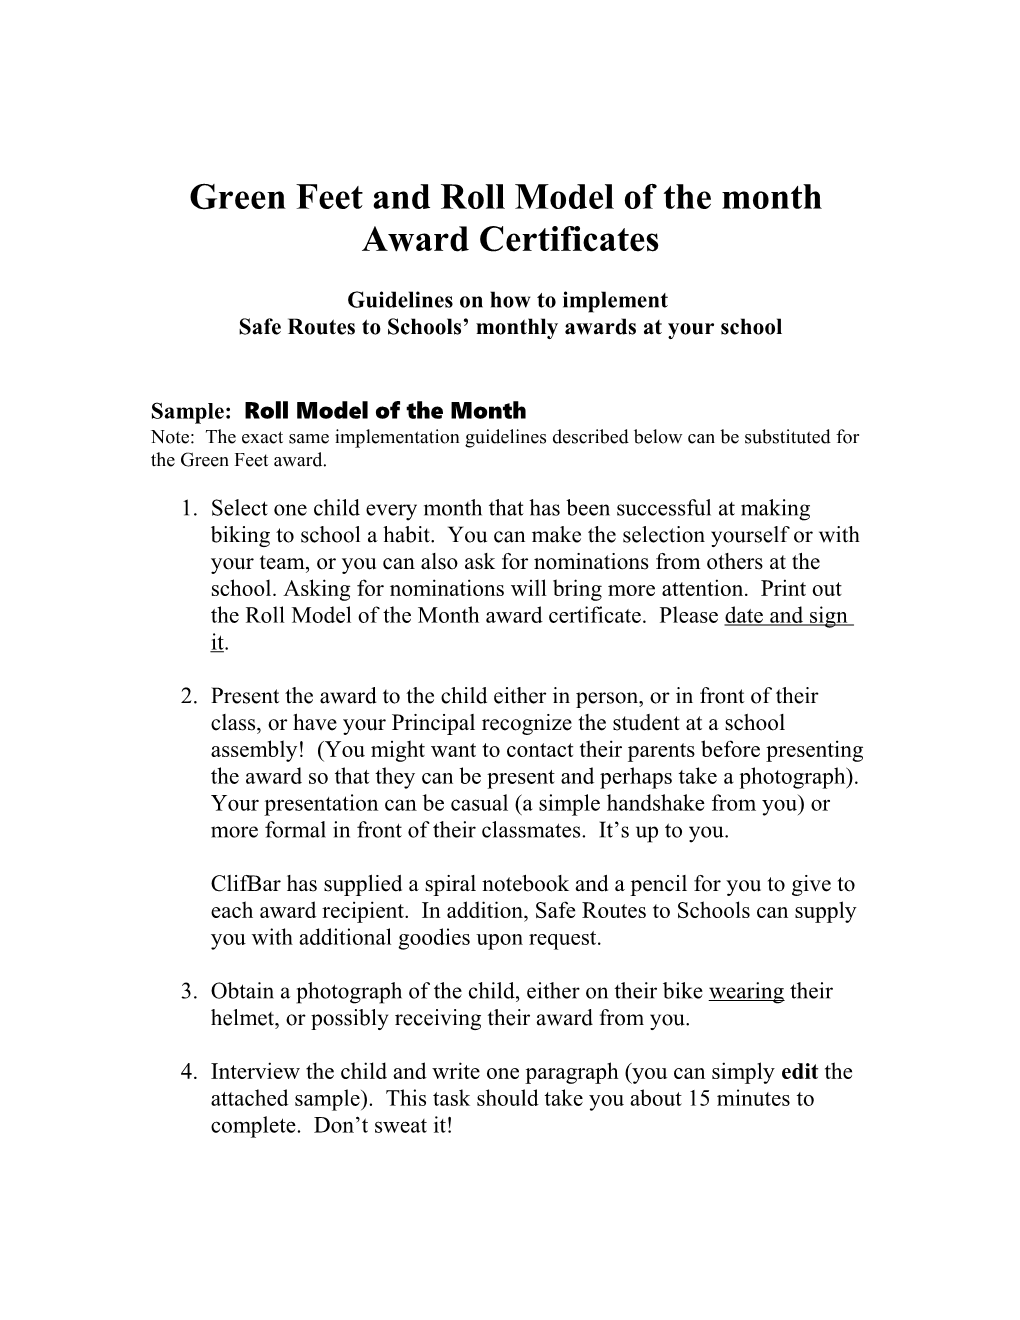 Sample: Roll Model of the Month